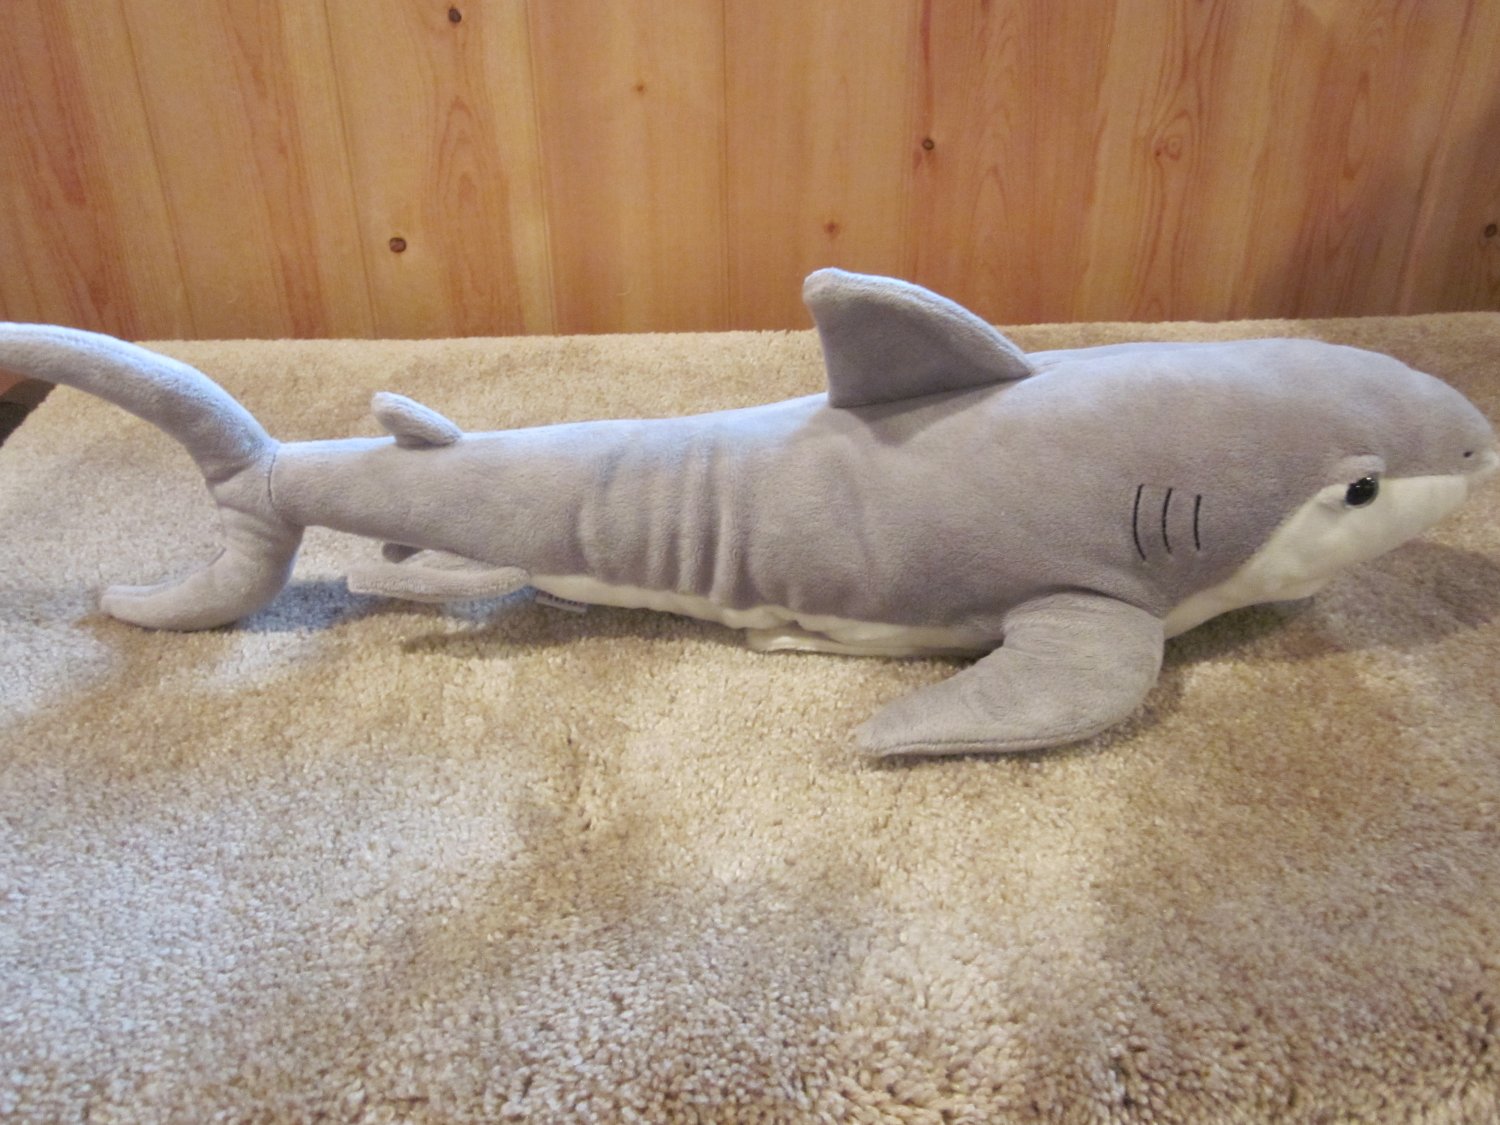 Large Plush Shark by Gund fun Sings 'One Way or Another and moves its ...